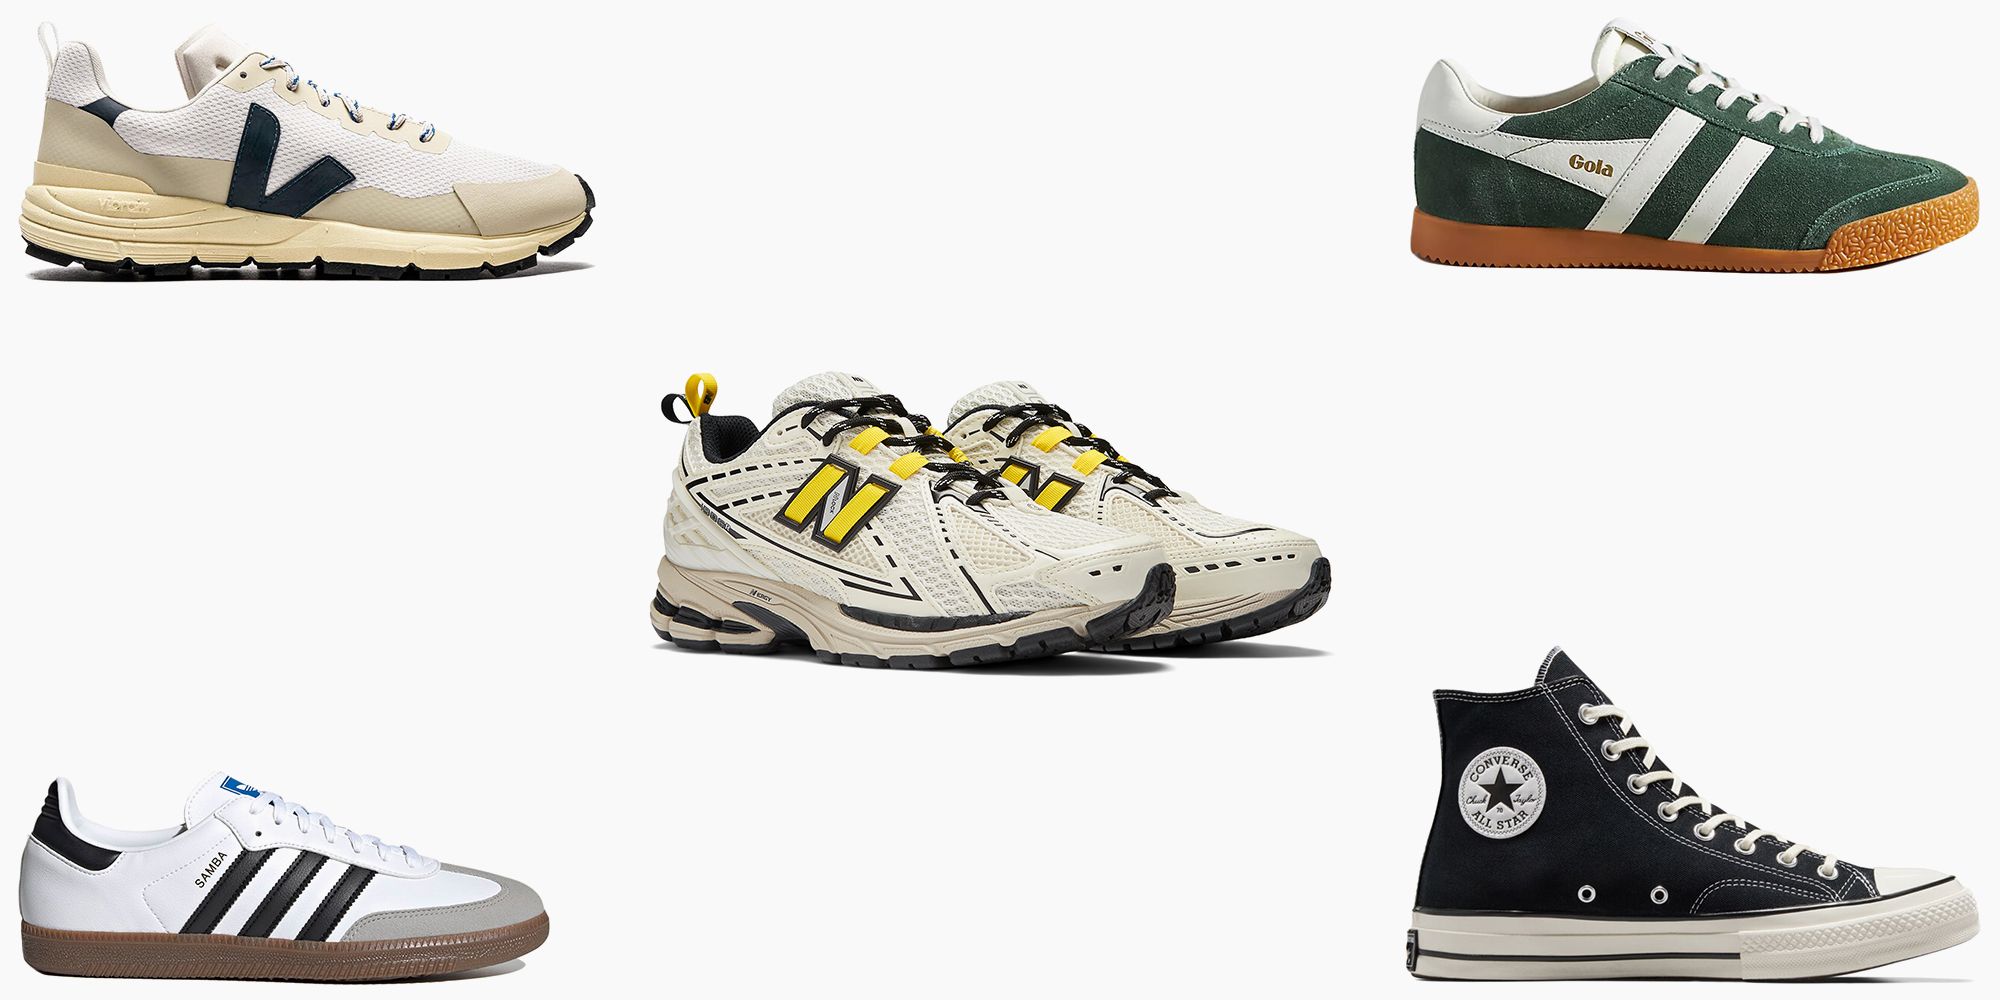 Coolest Retro Sneakers To Get Now - Cool Retro-Inspired Sneakers